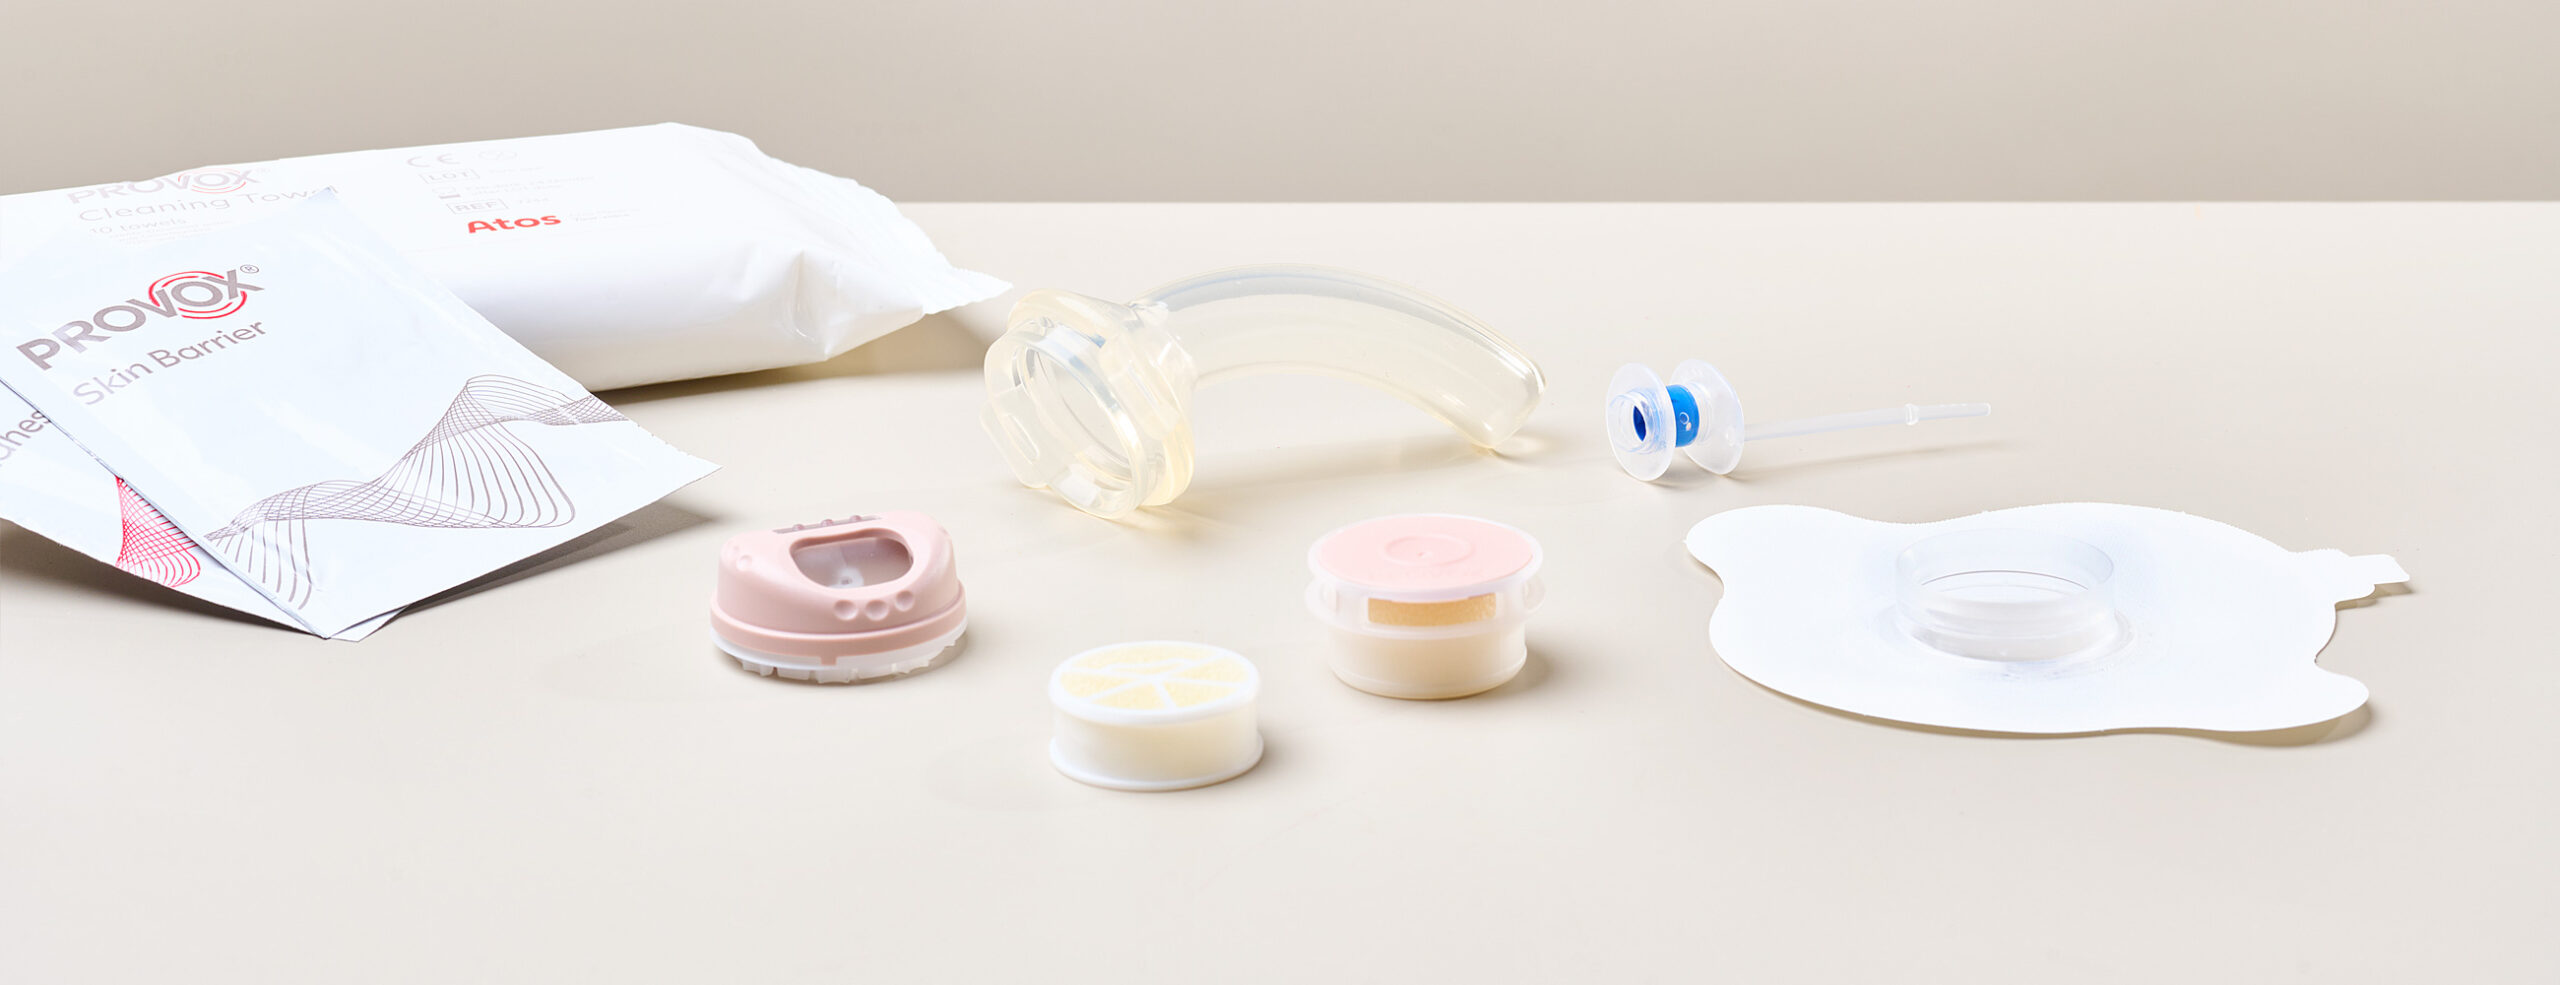 Atos patient products including HME, adhesives, tracheostomy tube, and wipes